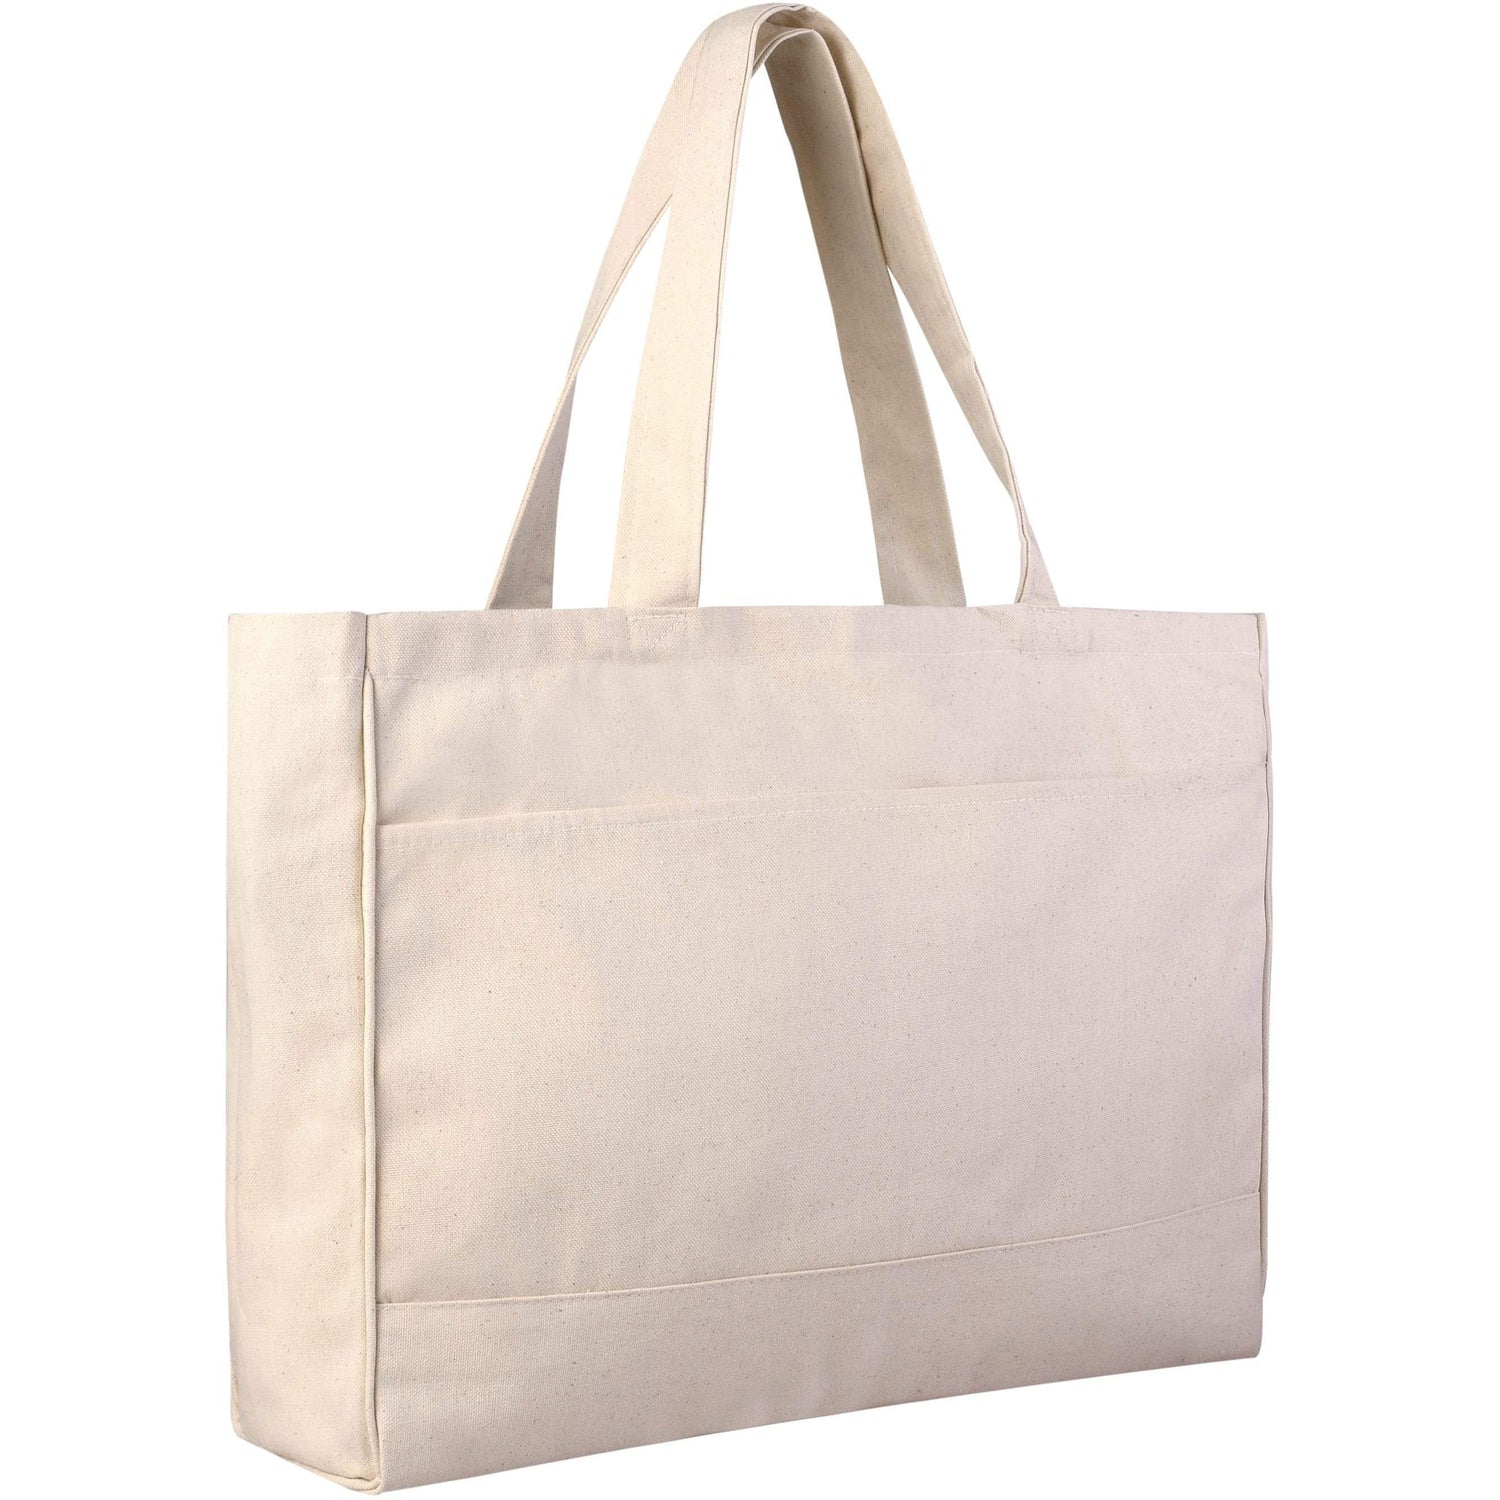 Canvas Tote Bags Wholesale, Large Canvas Tote Bag with Zipper Pocket â BagzDepotâ¢